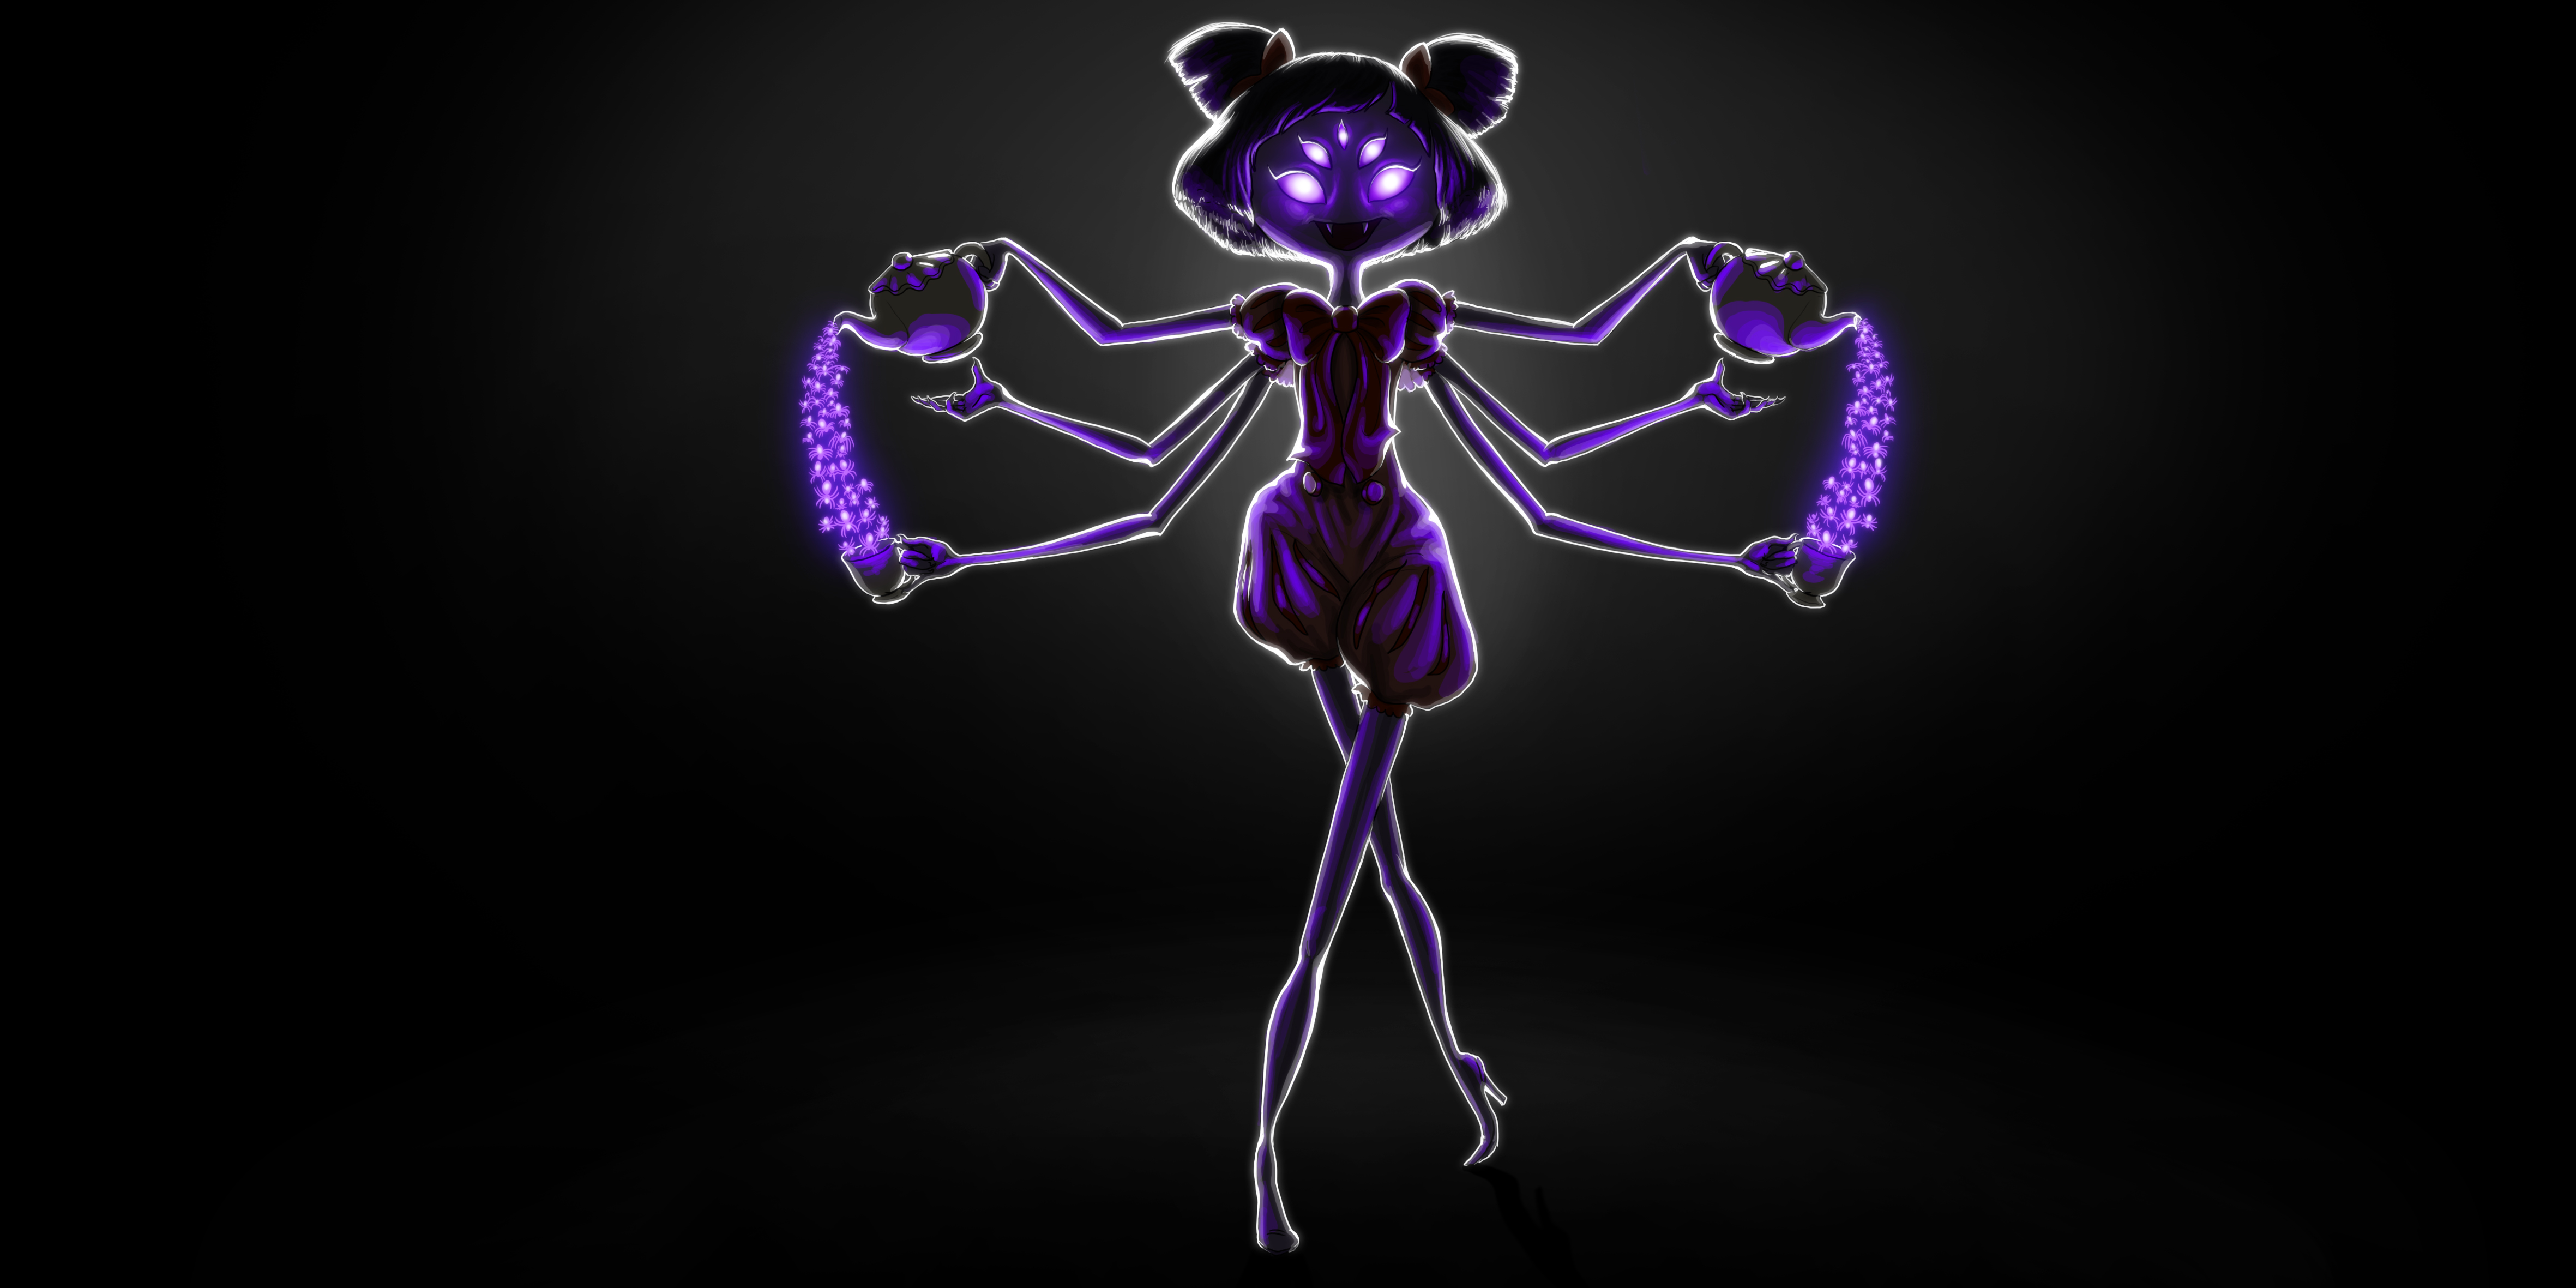 Muffet - Would you like a cup of spiders? by leda456